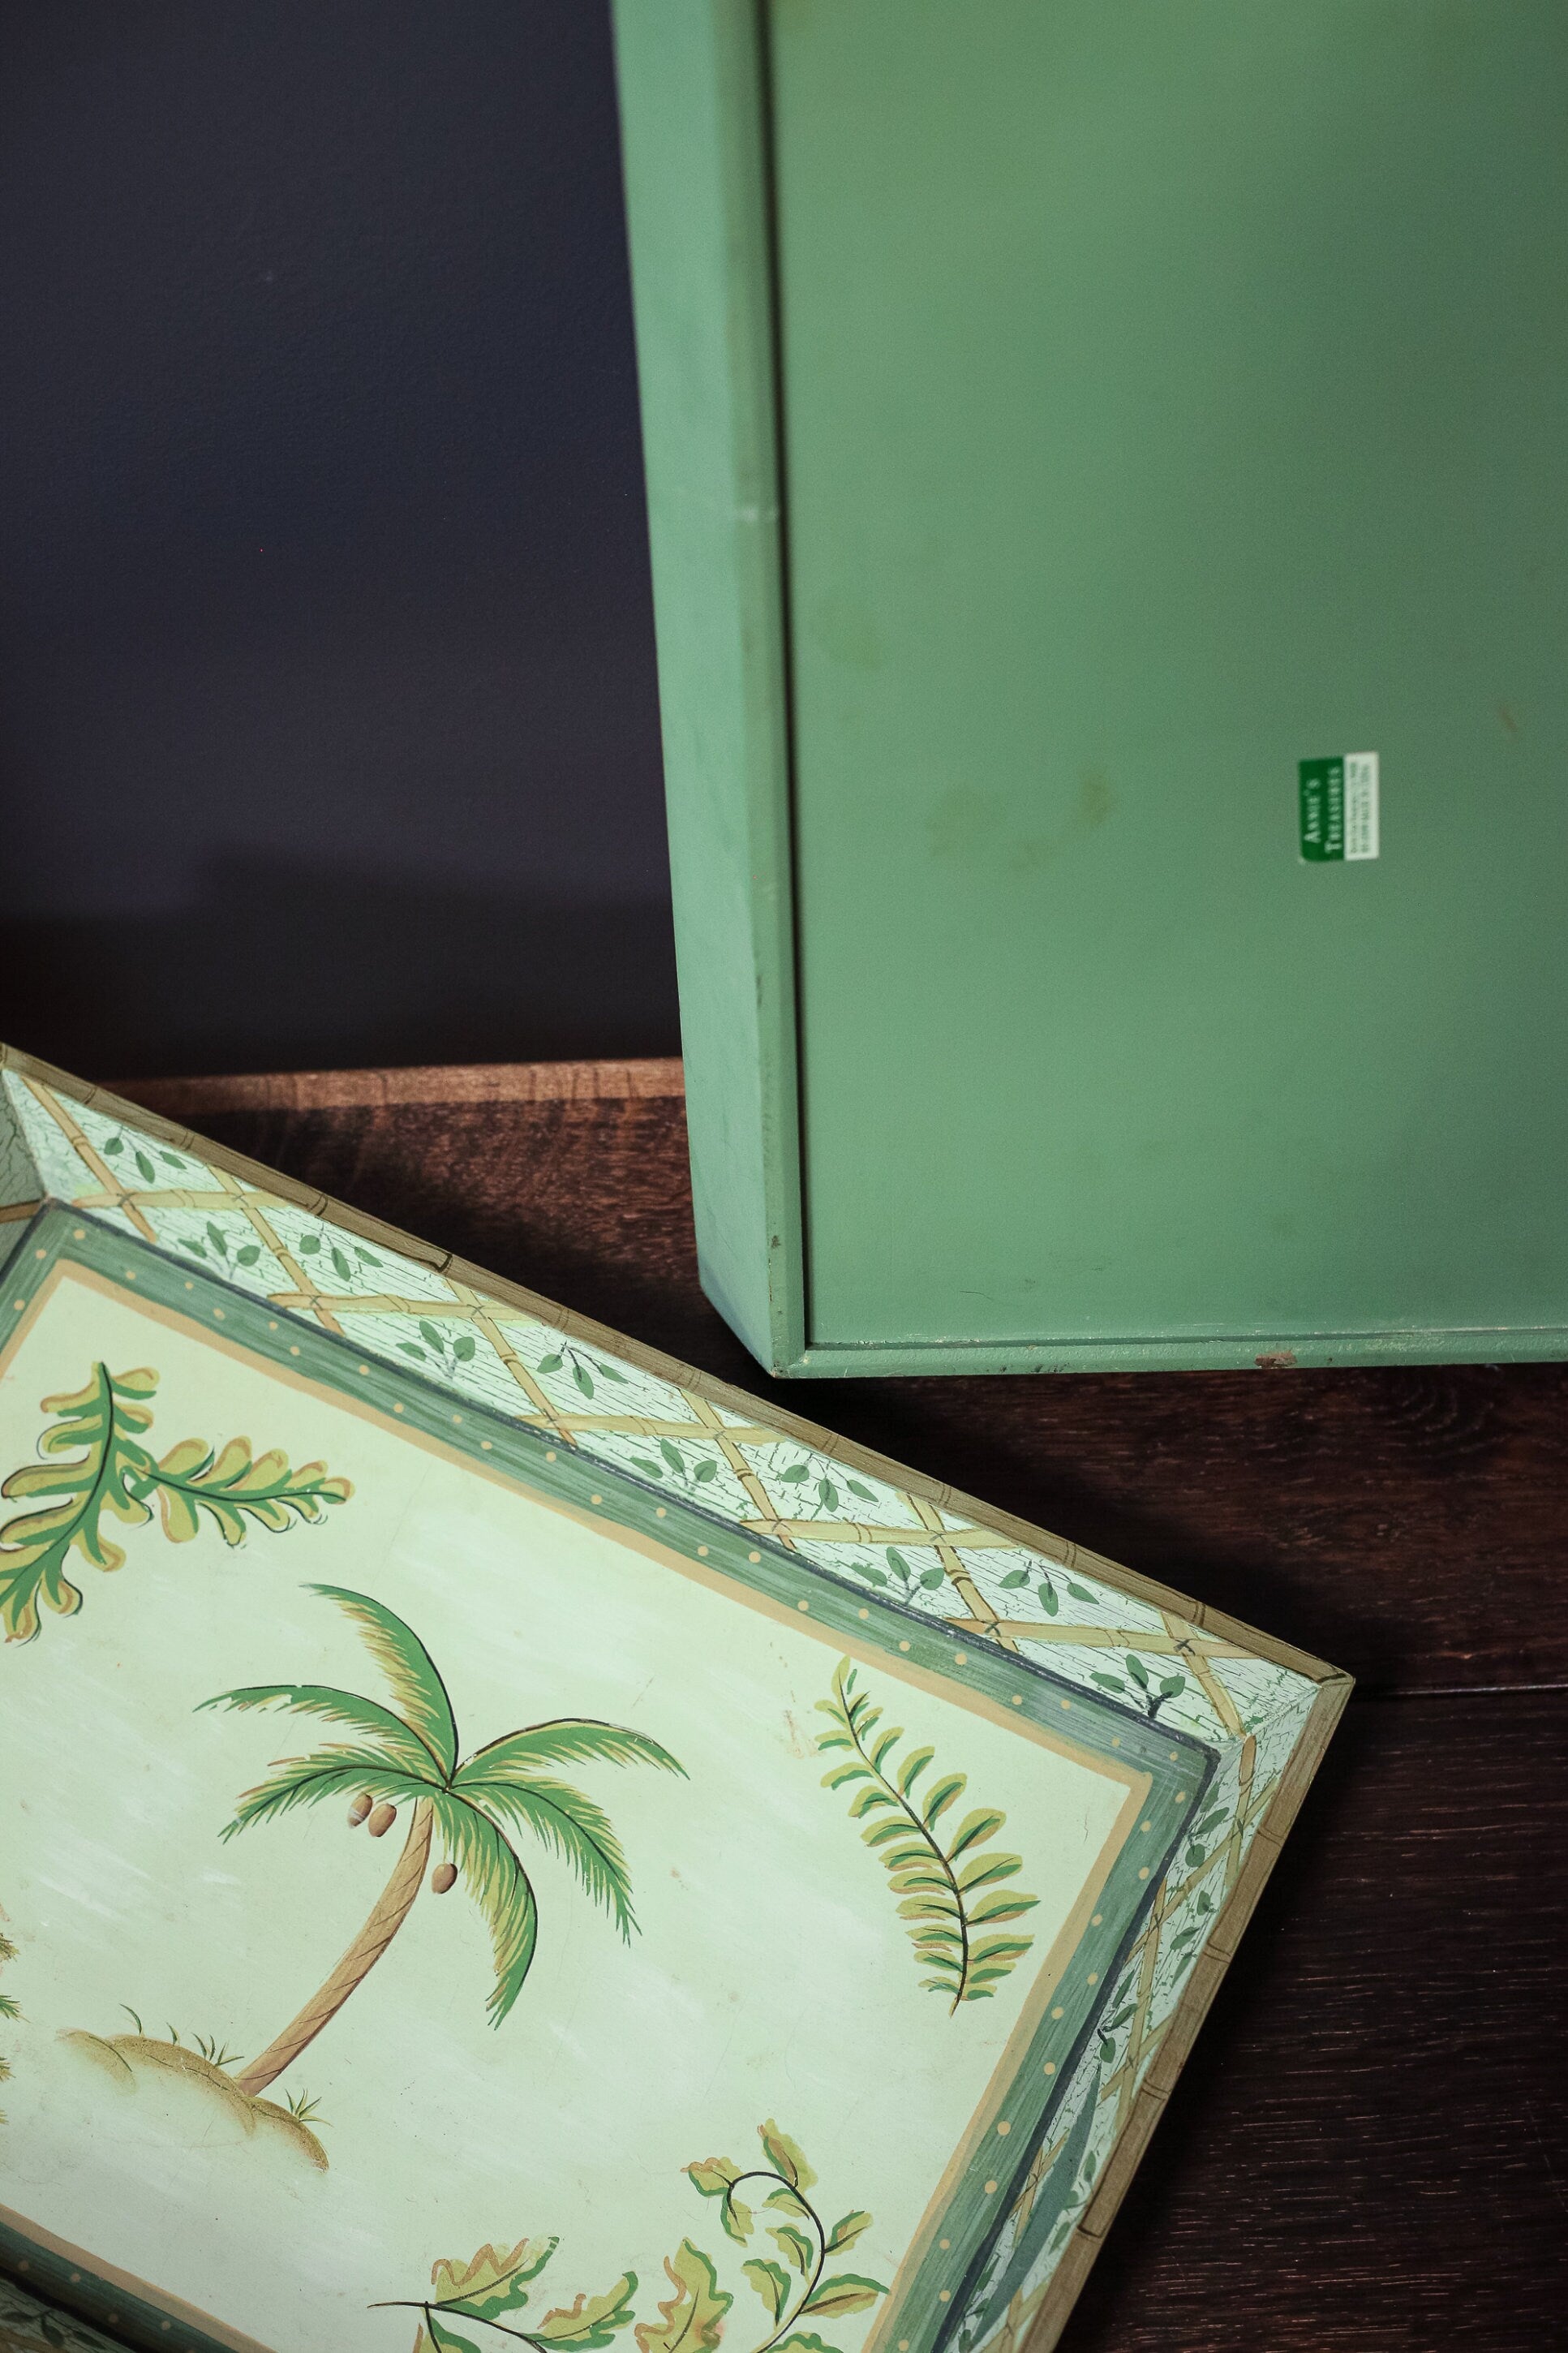 Set of Two Palm Tree and Bamboo Green Nesting Trays - Pair of Decorative Wood Serving Trays with Handles